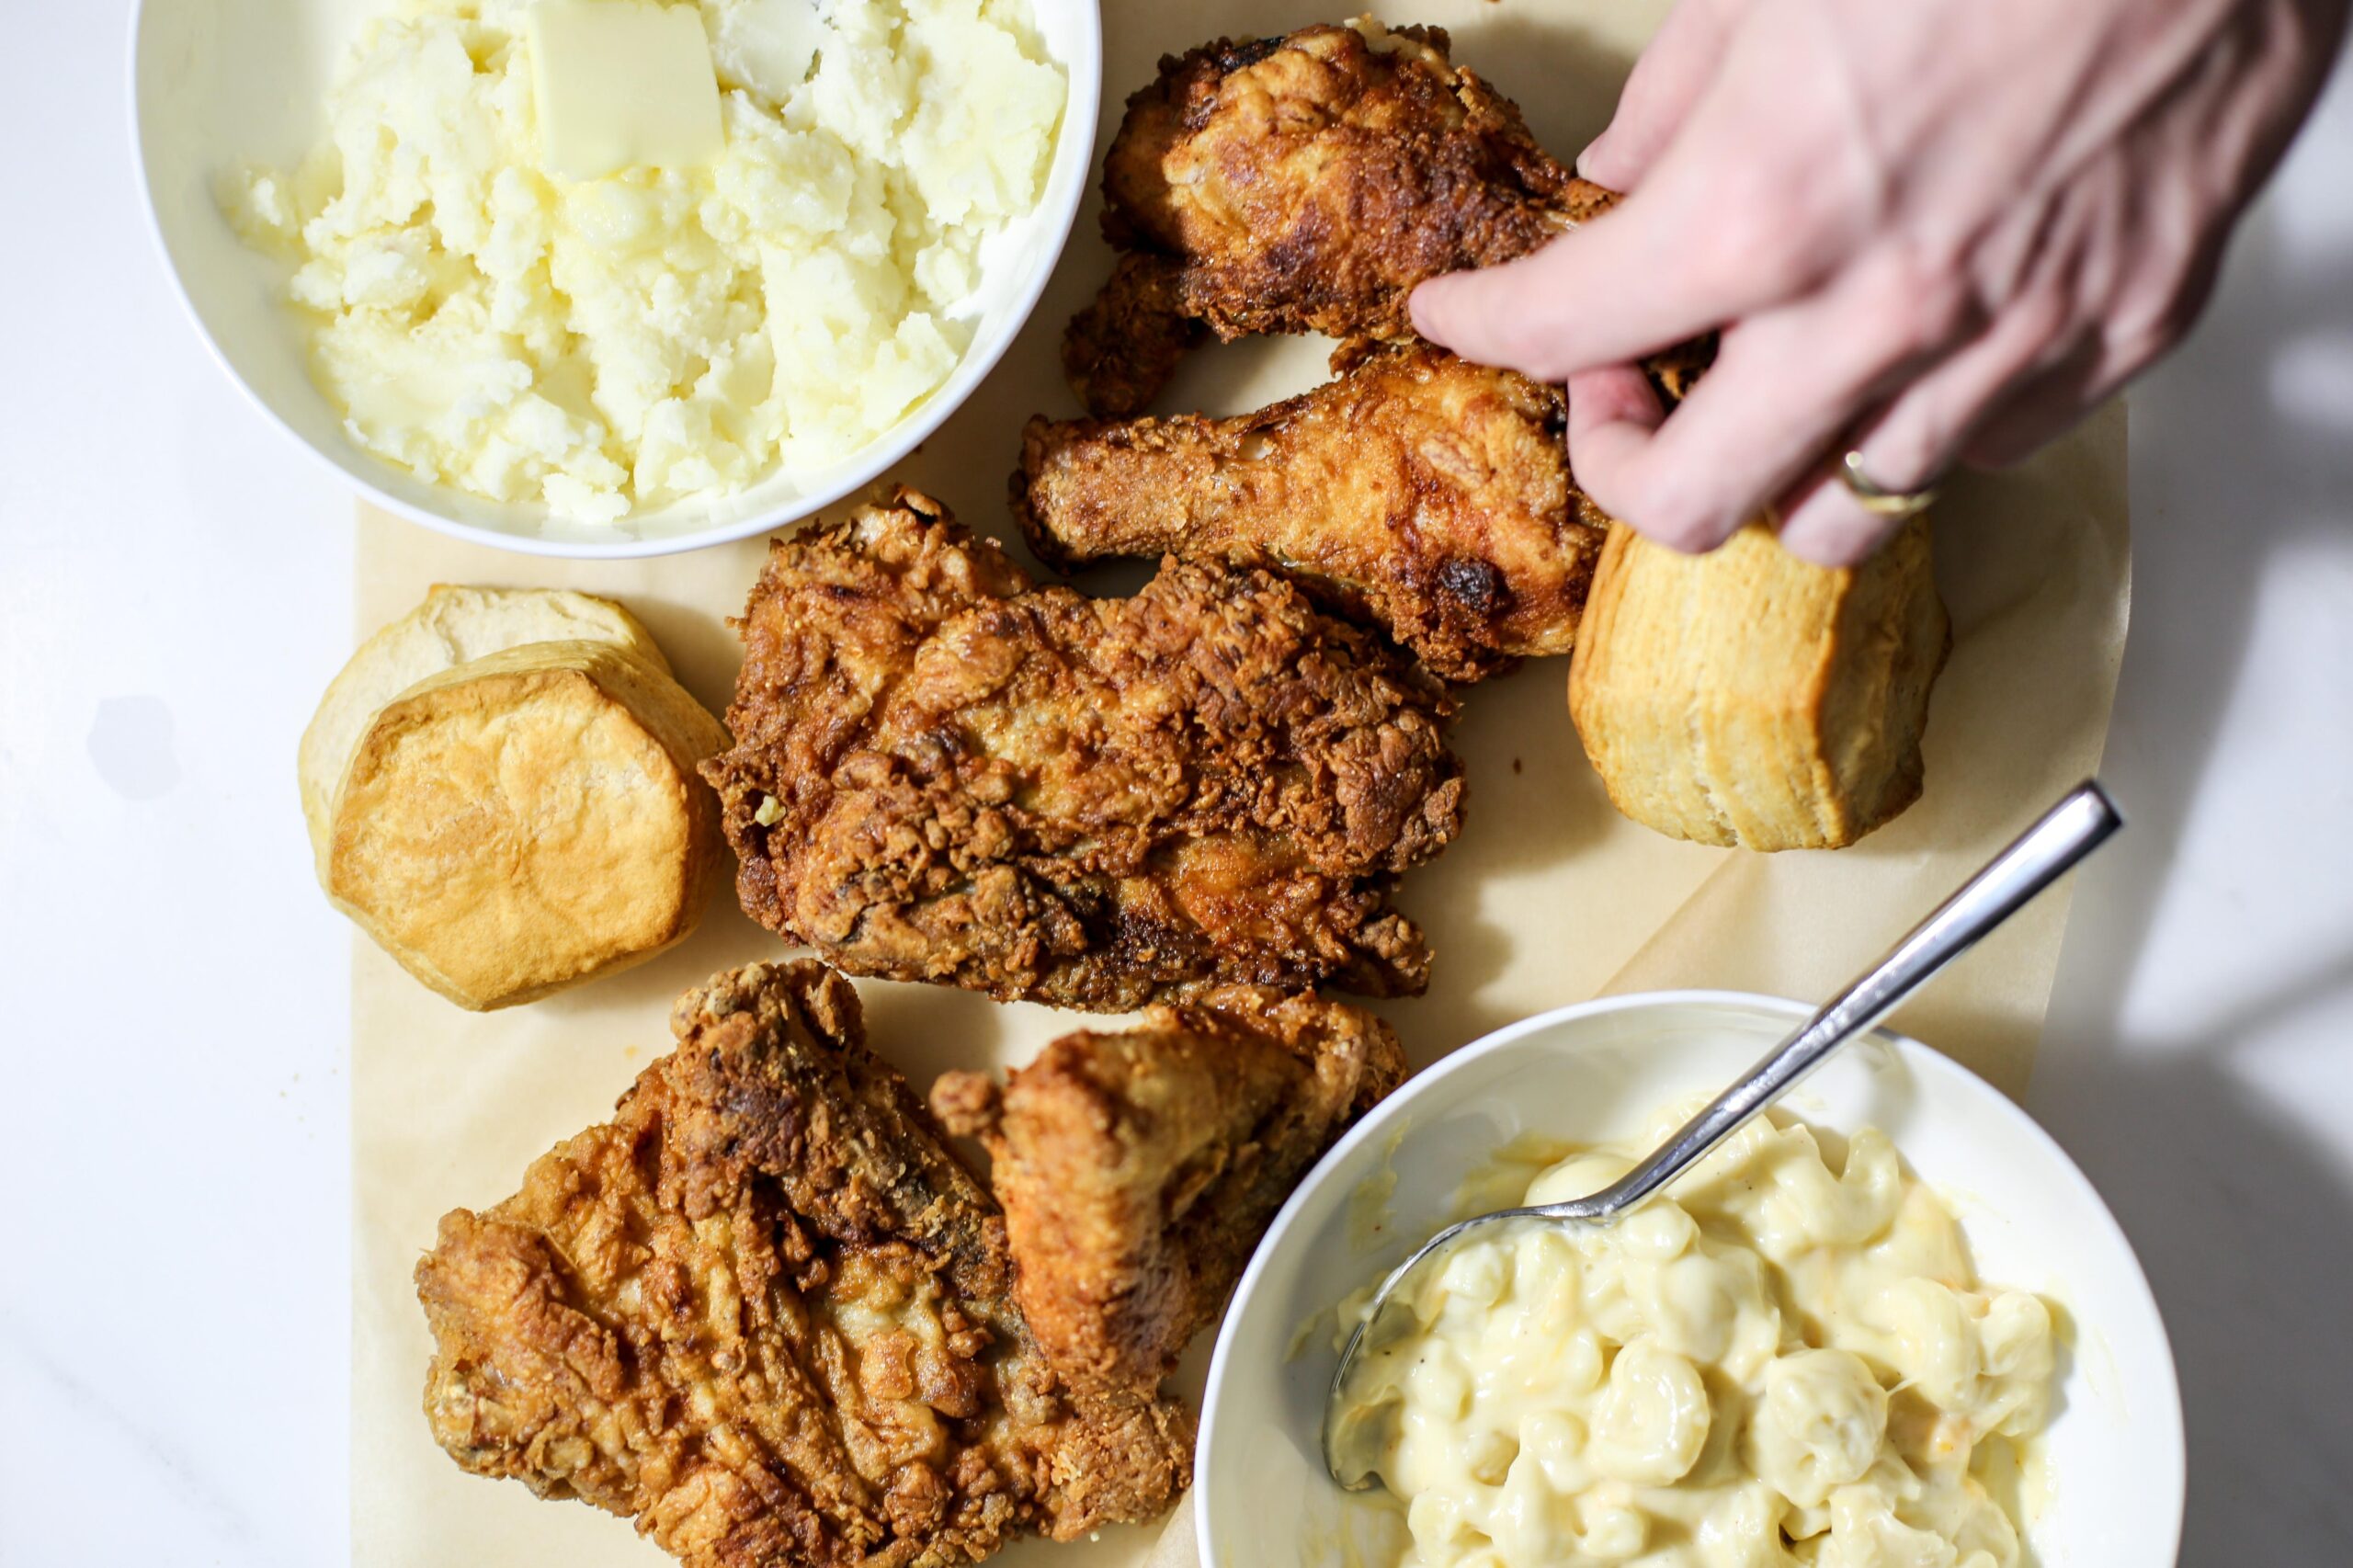  There's nothing like hot fresh chicken right from the pot